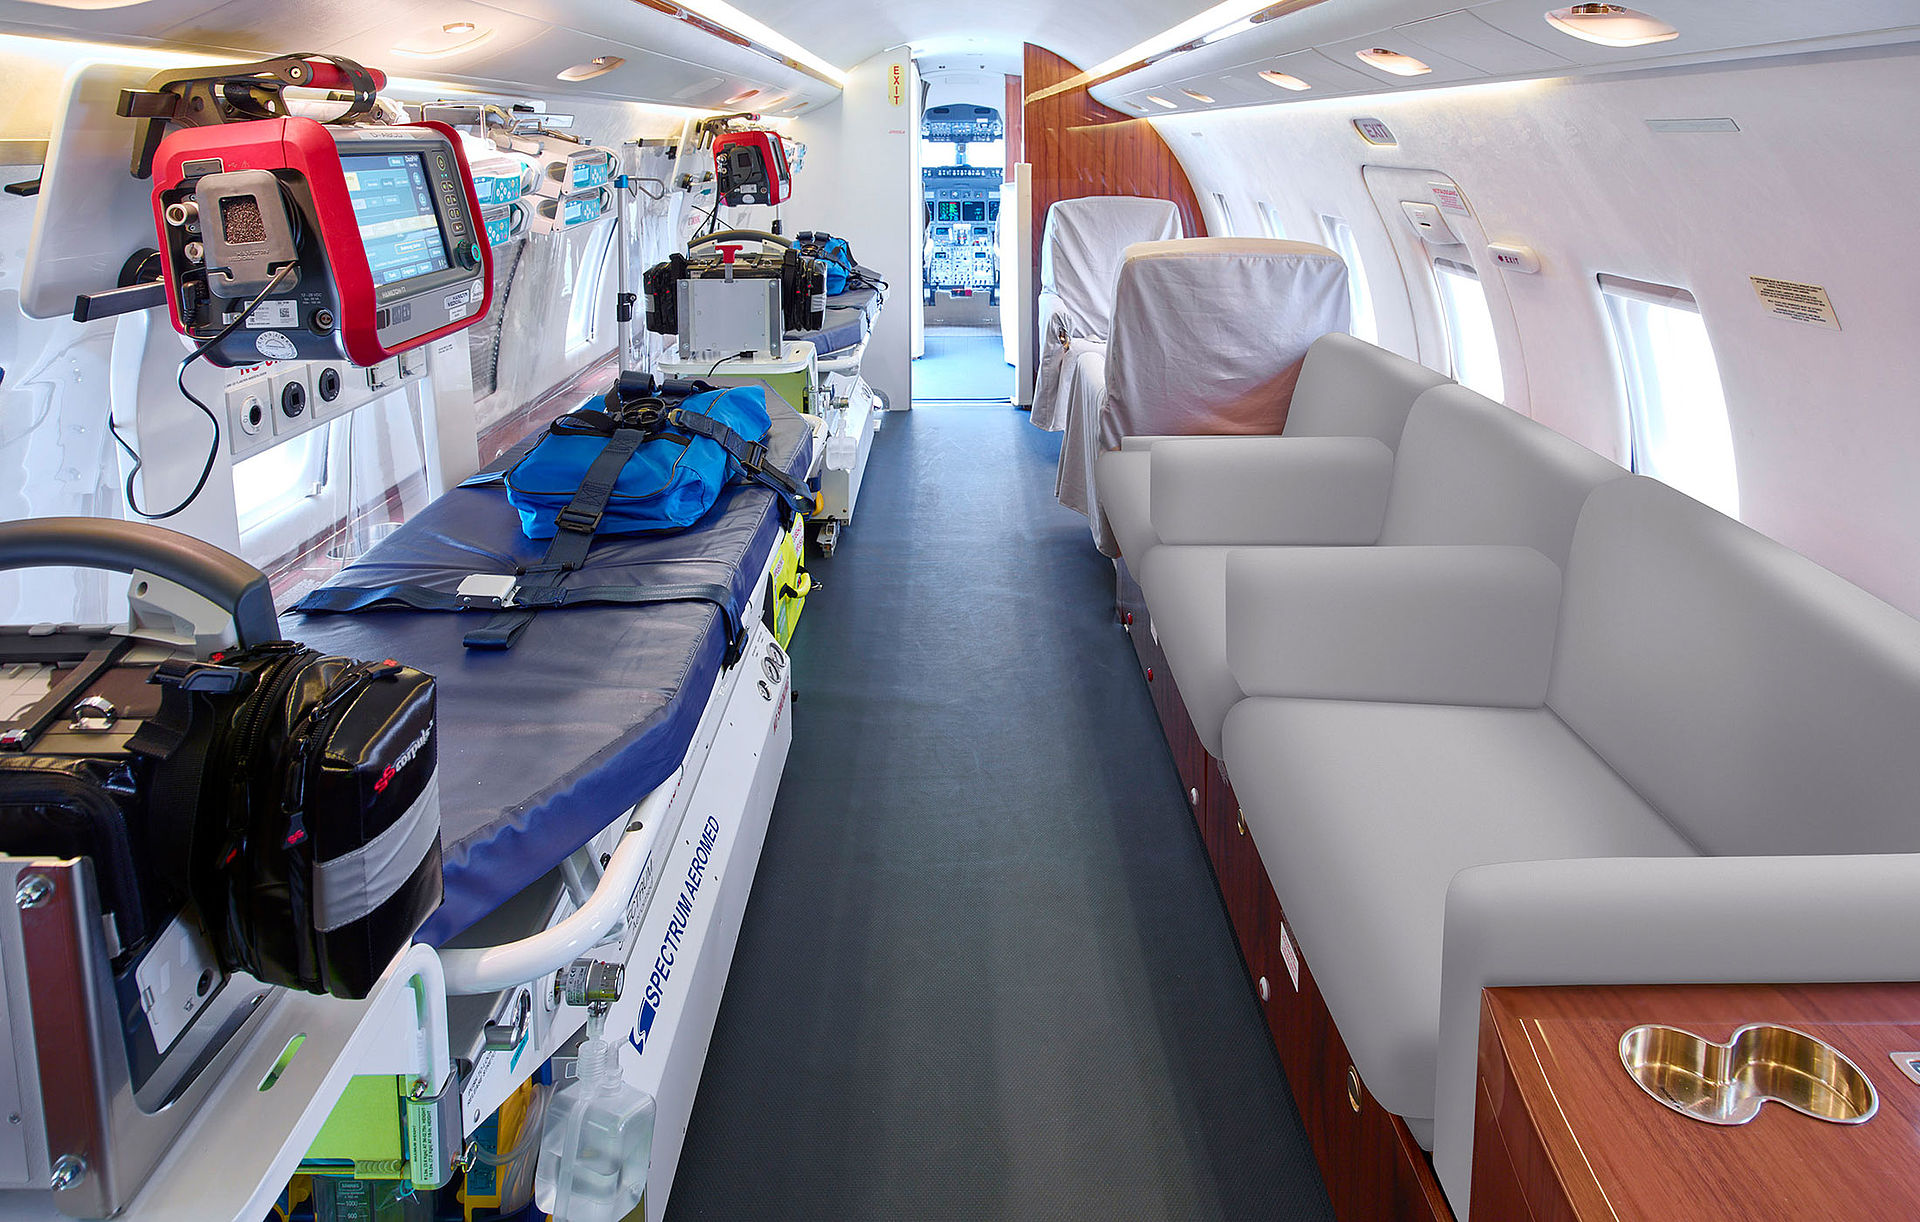 Aero-Dienst Aircraft Sales | Current listing CL604 SN 5565 | air ambulance cabin configuration